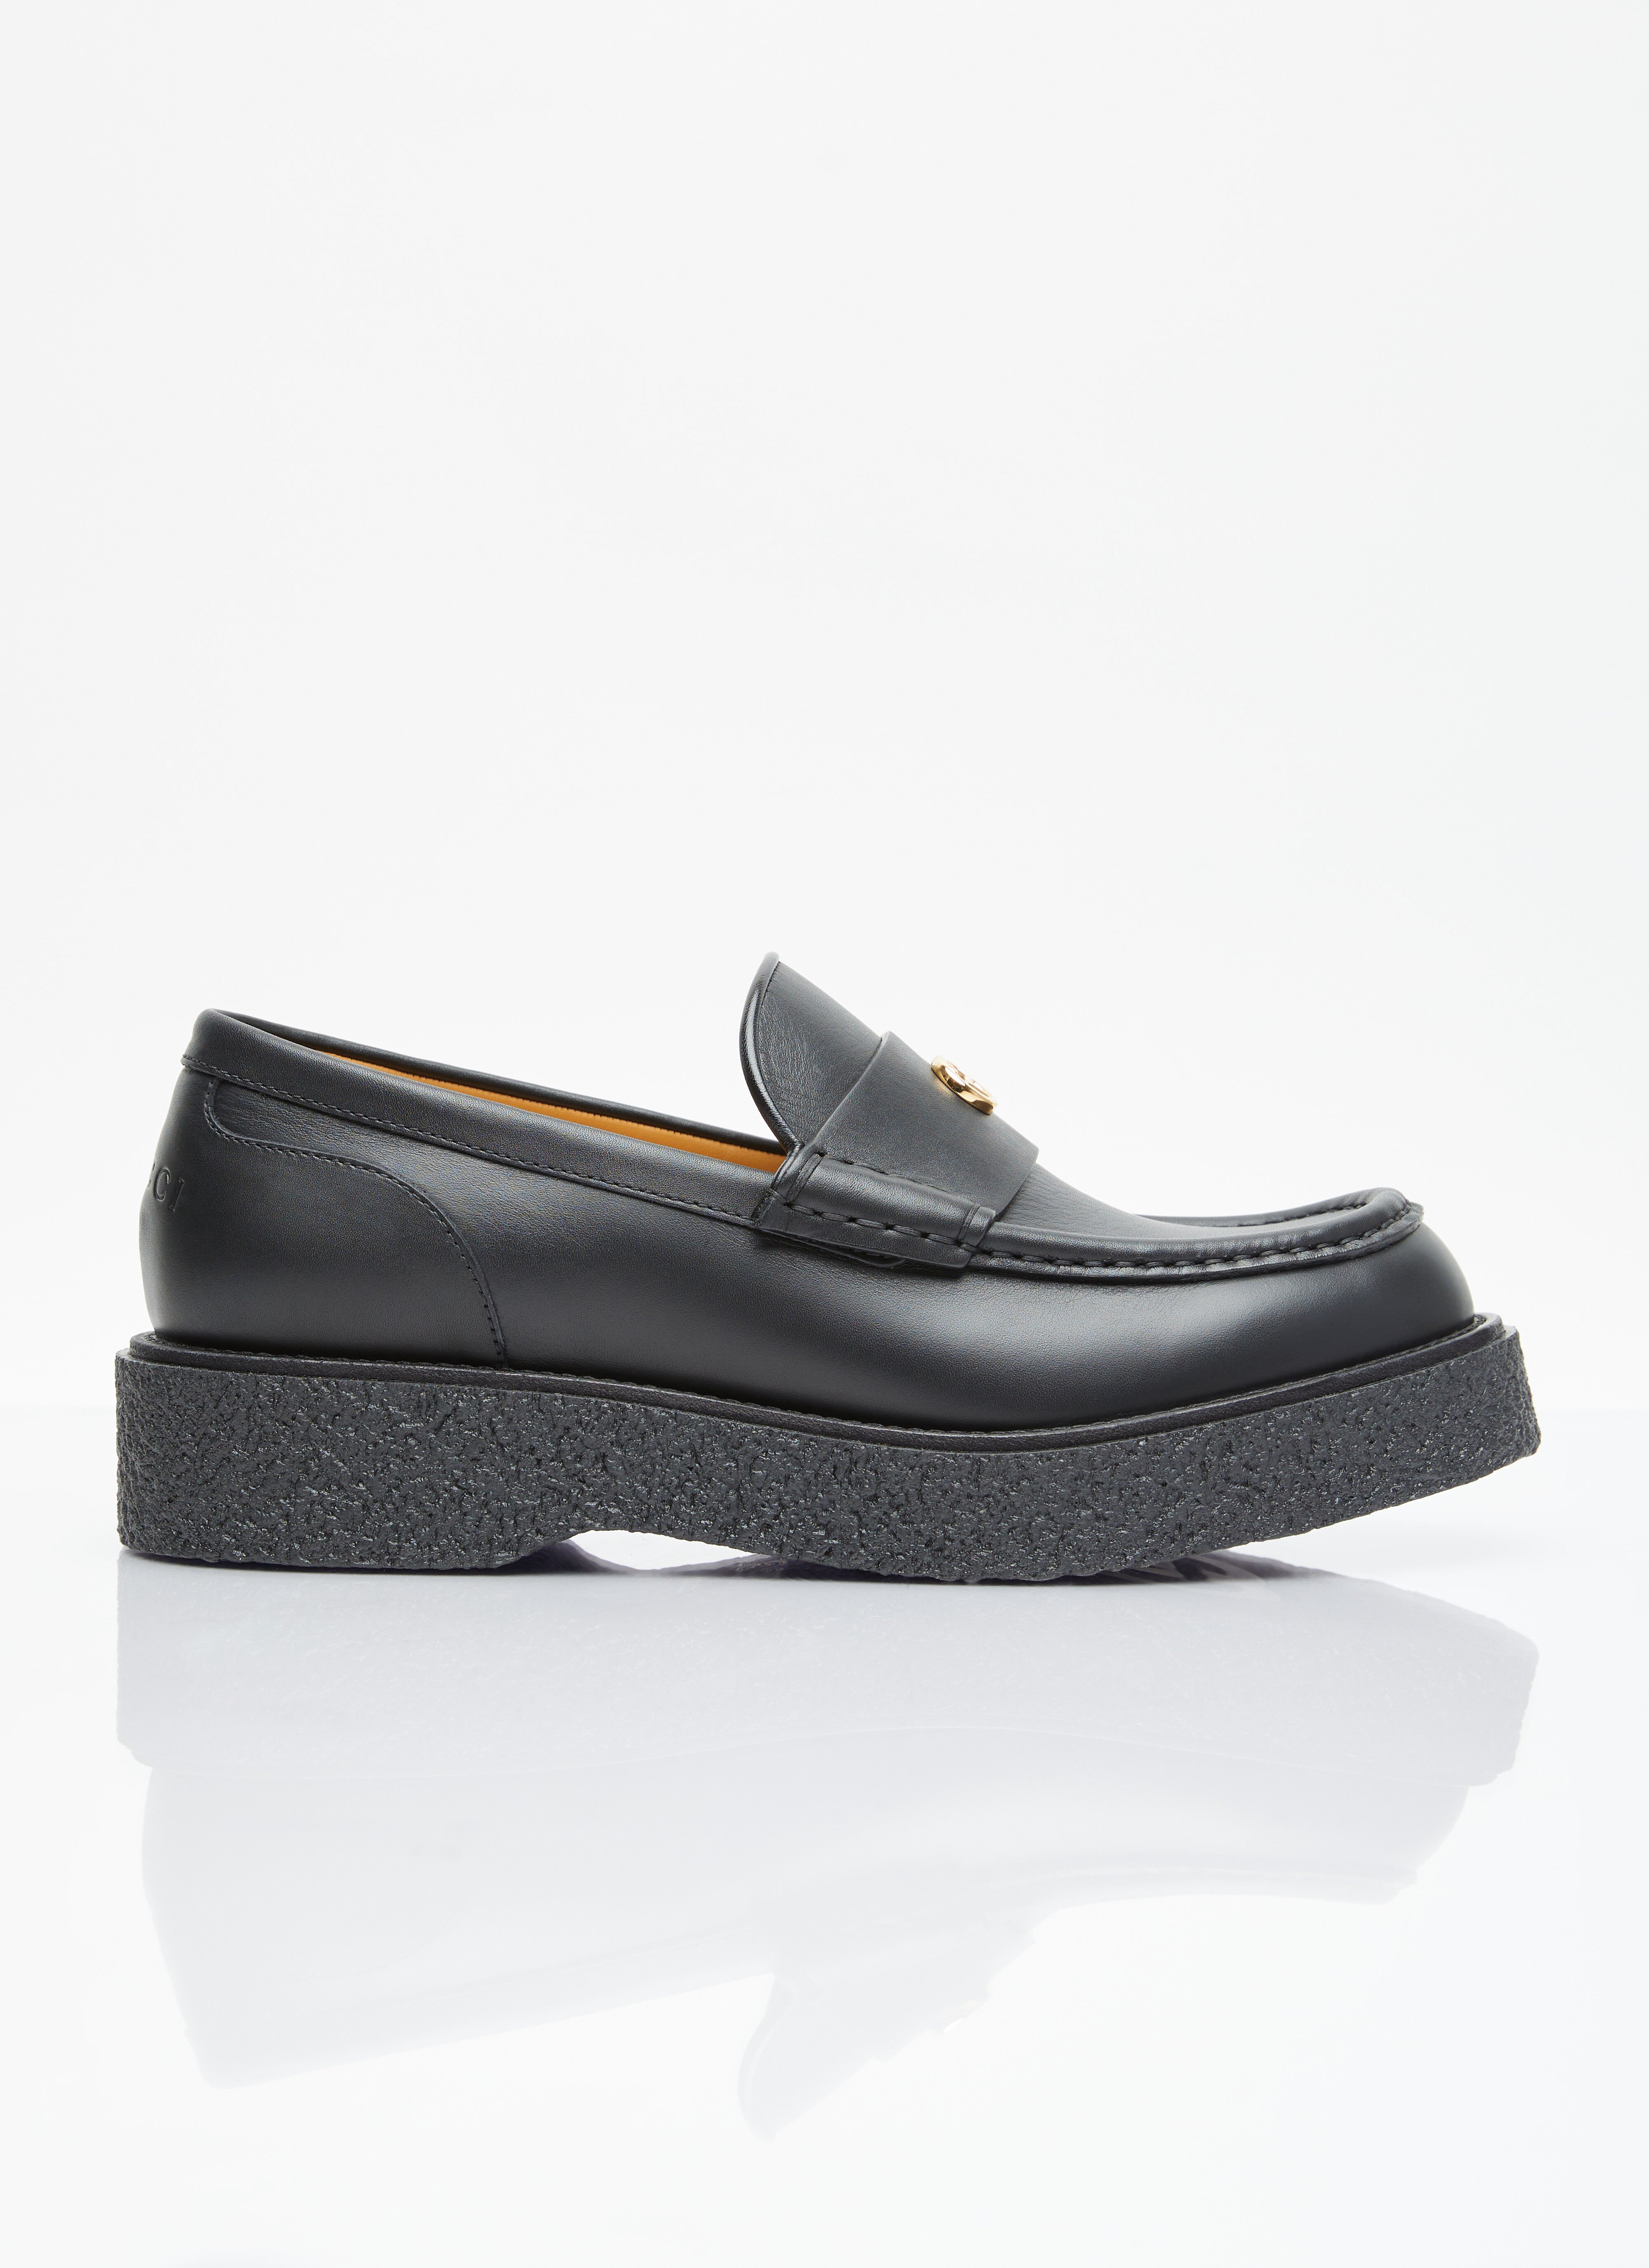 Thom Browne Logo Plaque Leather Loafers Black thb0155012